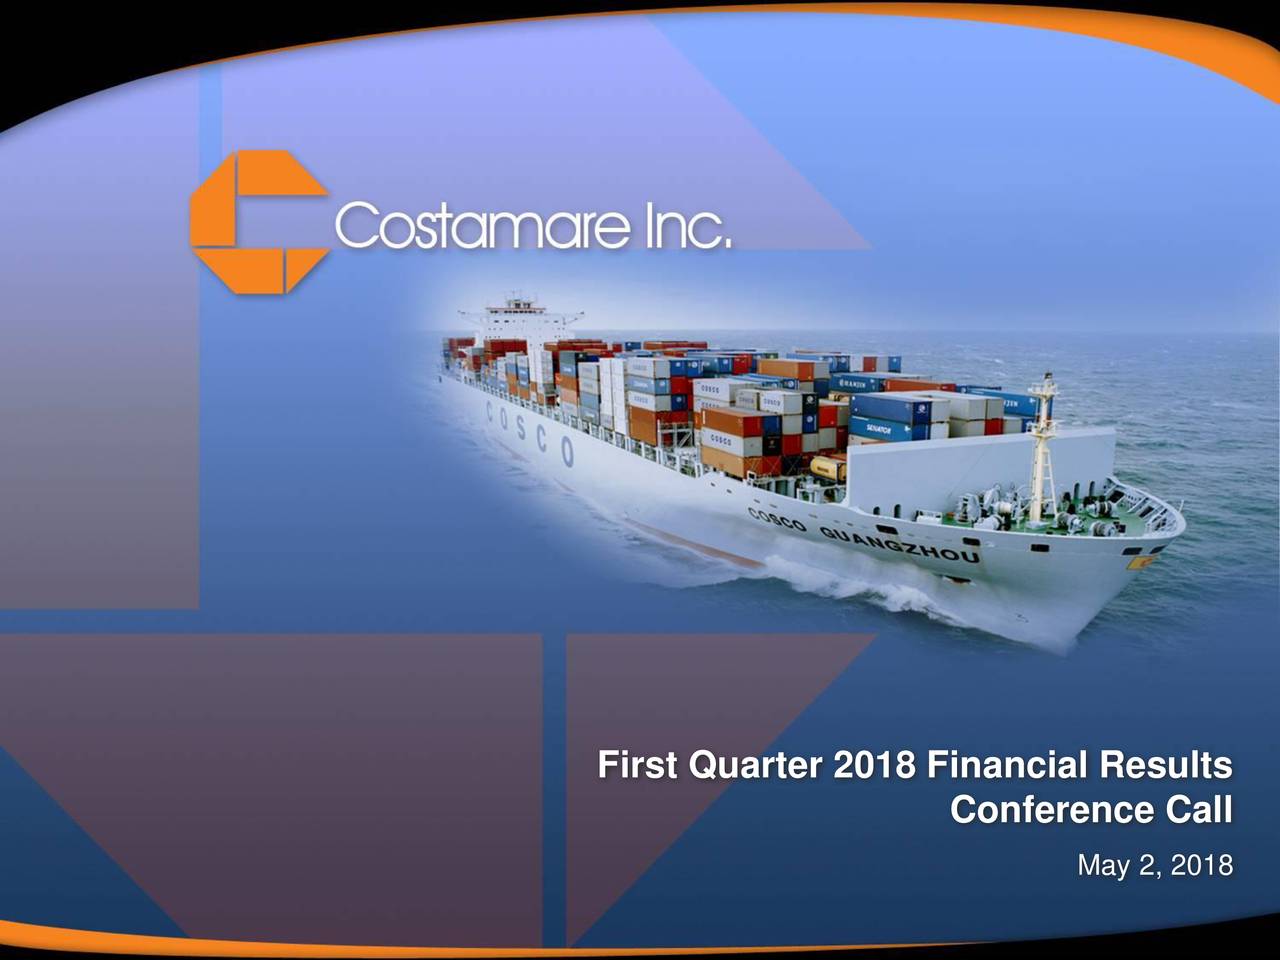 First Quarter 2018 Financial Results